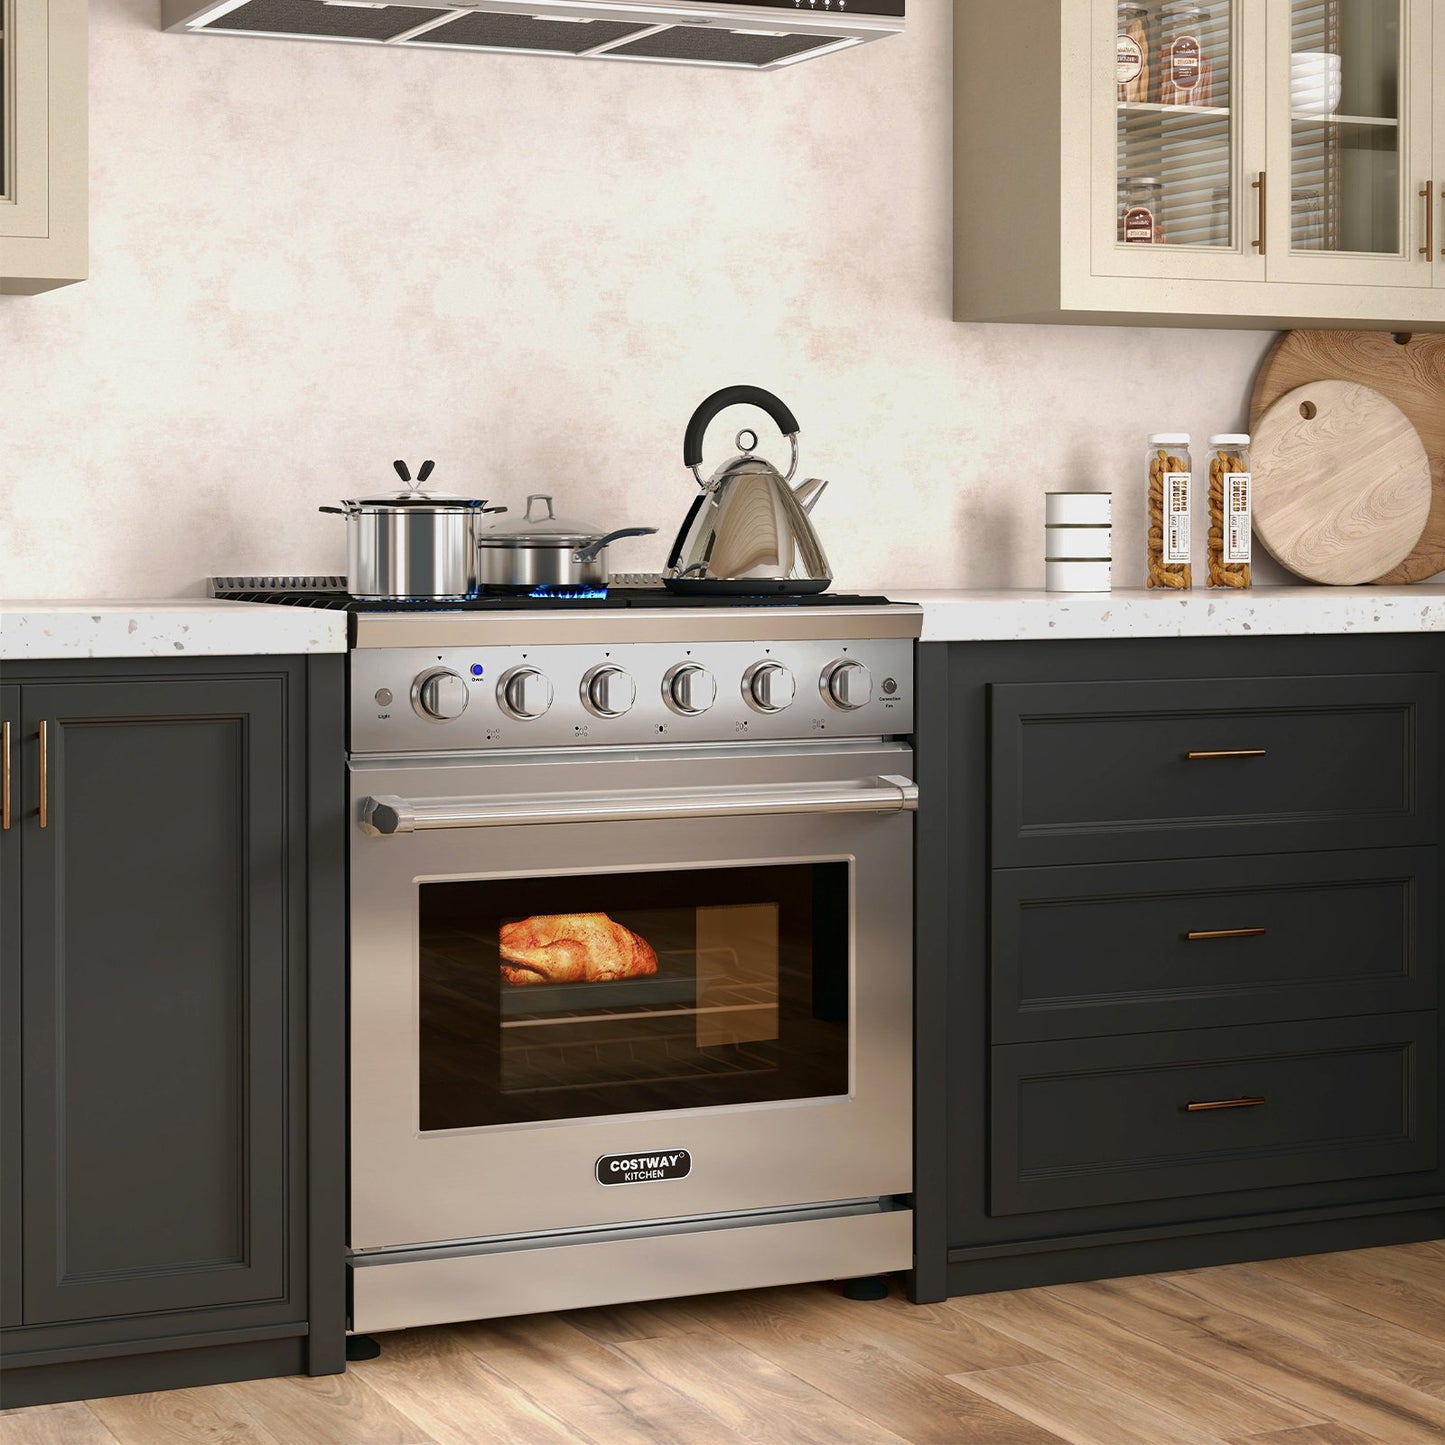 30 Inches 120V Natural Gas Range with 5 Burners Cooktop, Silver